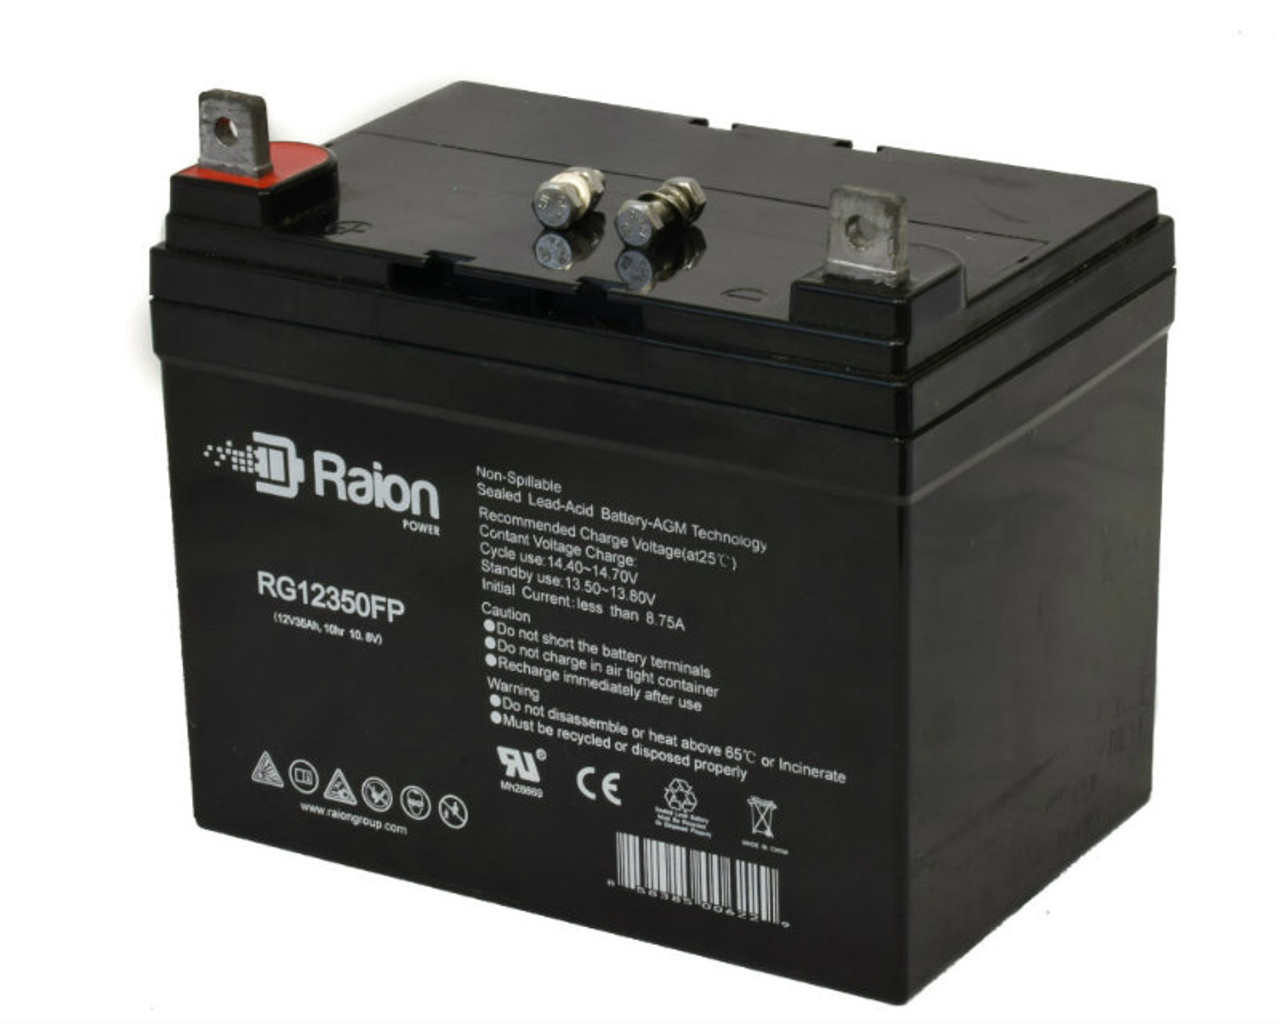 Raion Power Replacement 12V 35Ah Battery for NEATA NT12-35 - 1 Pack